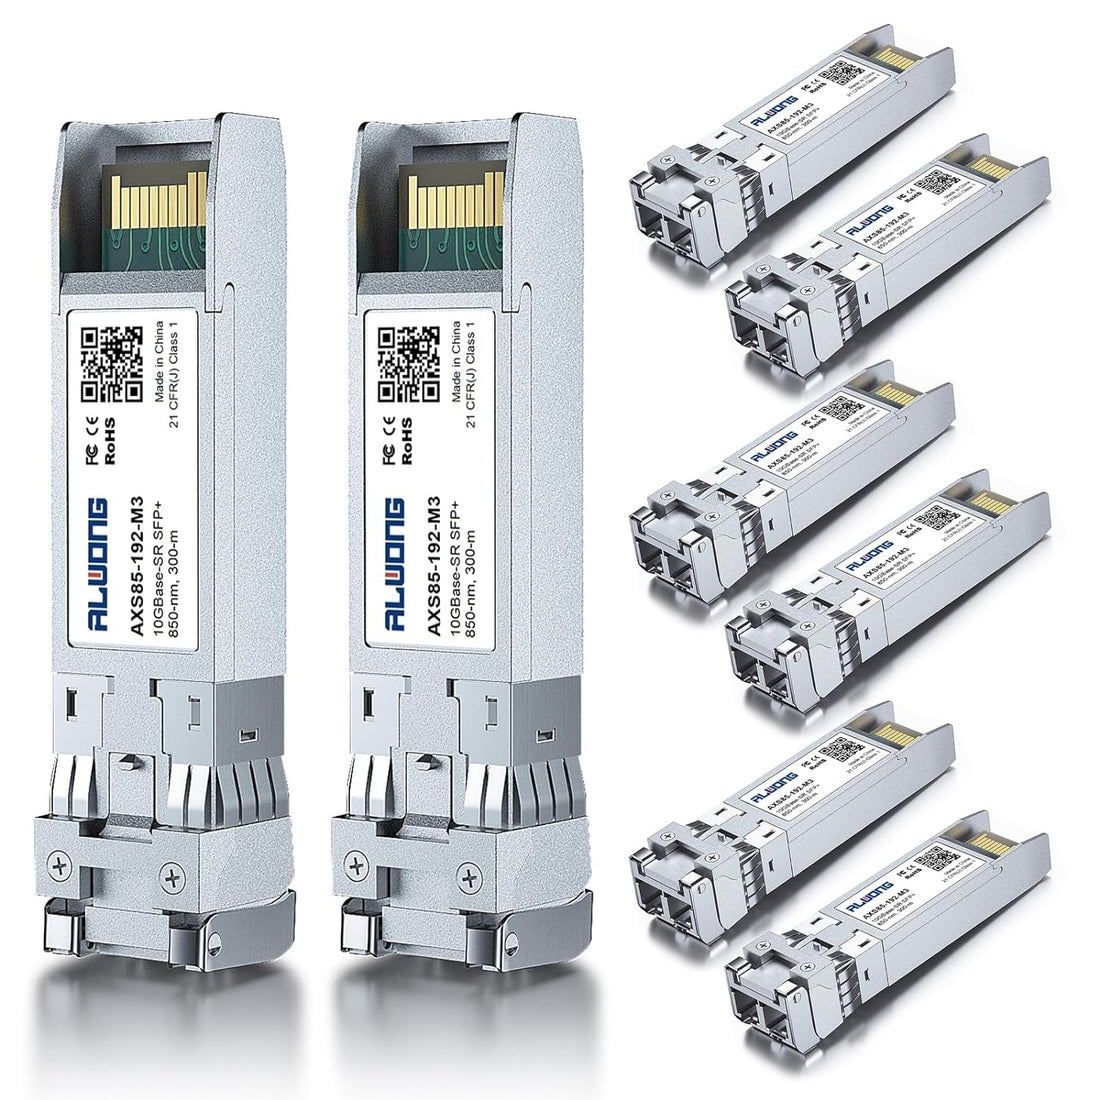 [10 Pack] 10GBase-SR 10G SFP+ to LC Transceiver for Cisco SFP-10G-SR, Meraki MA-SFP-10GB-SR, Ubiquiti UF-MM-10G,Mikrotik,Netgear,D-Link,and More（850nm MMF,up to 300-Meters）